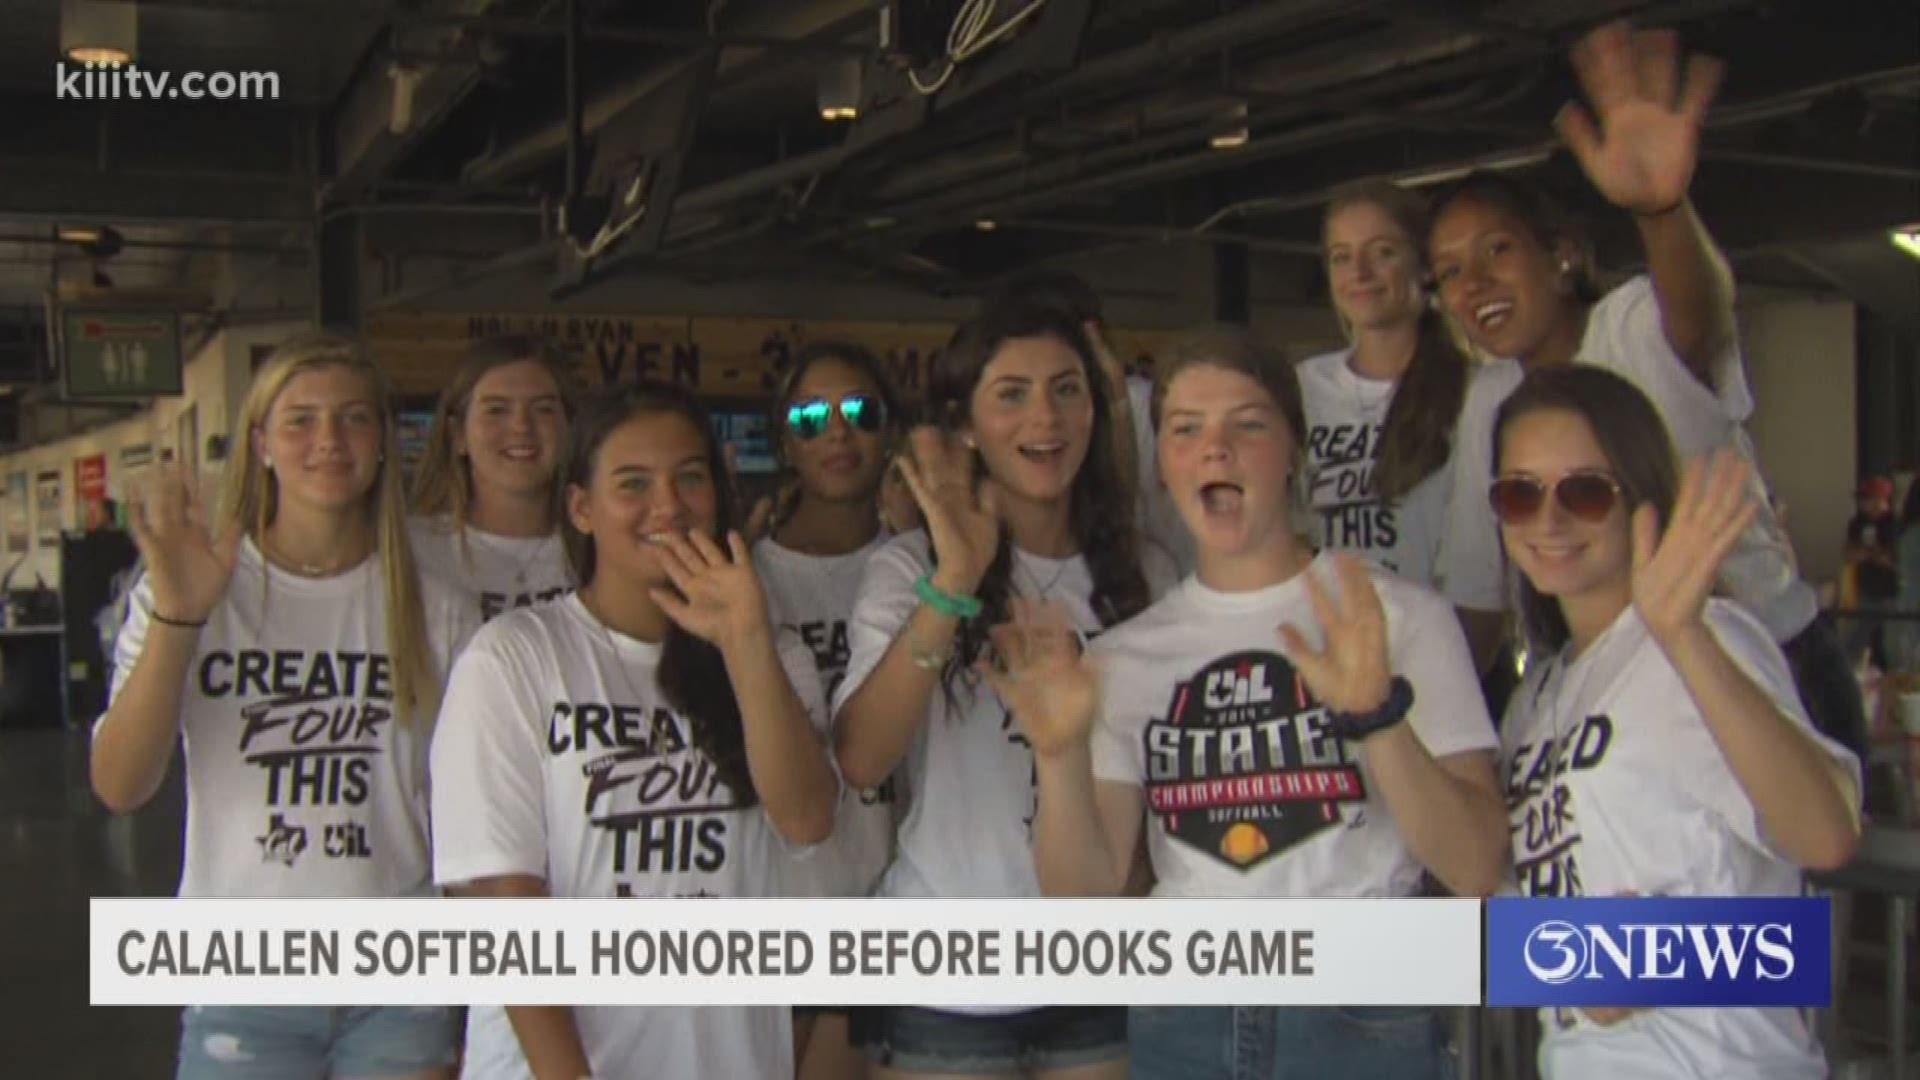 Calallen softball was recognized for it's run in the playoffs before Thursday night's Hooks win over the Sod Poodles.